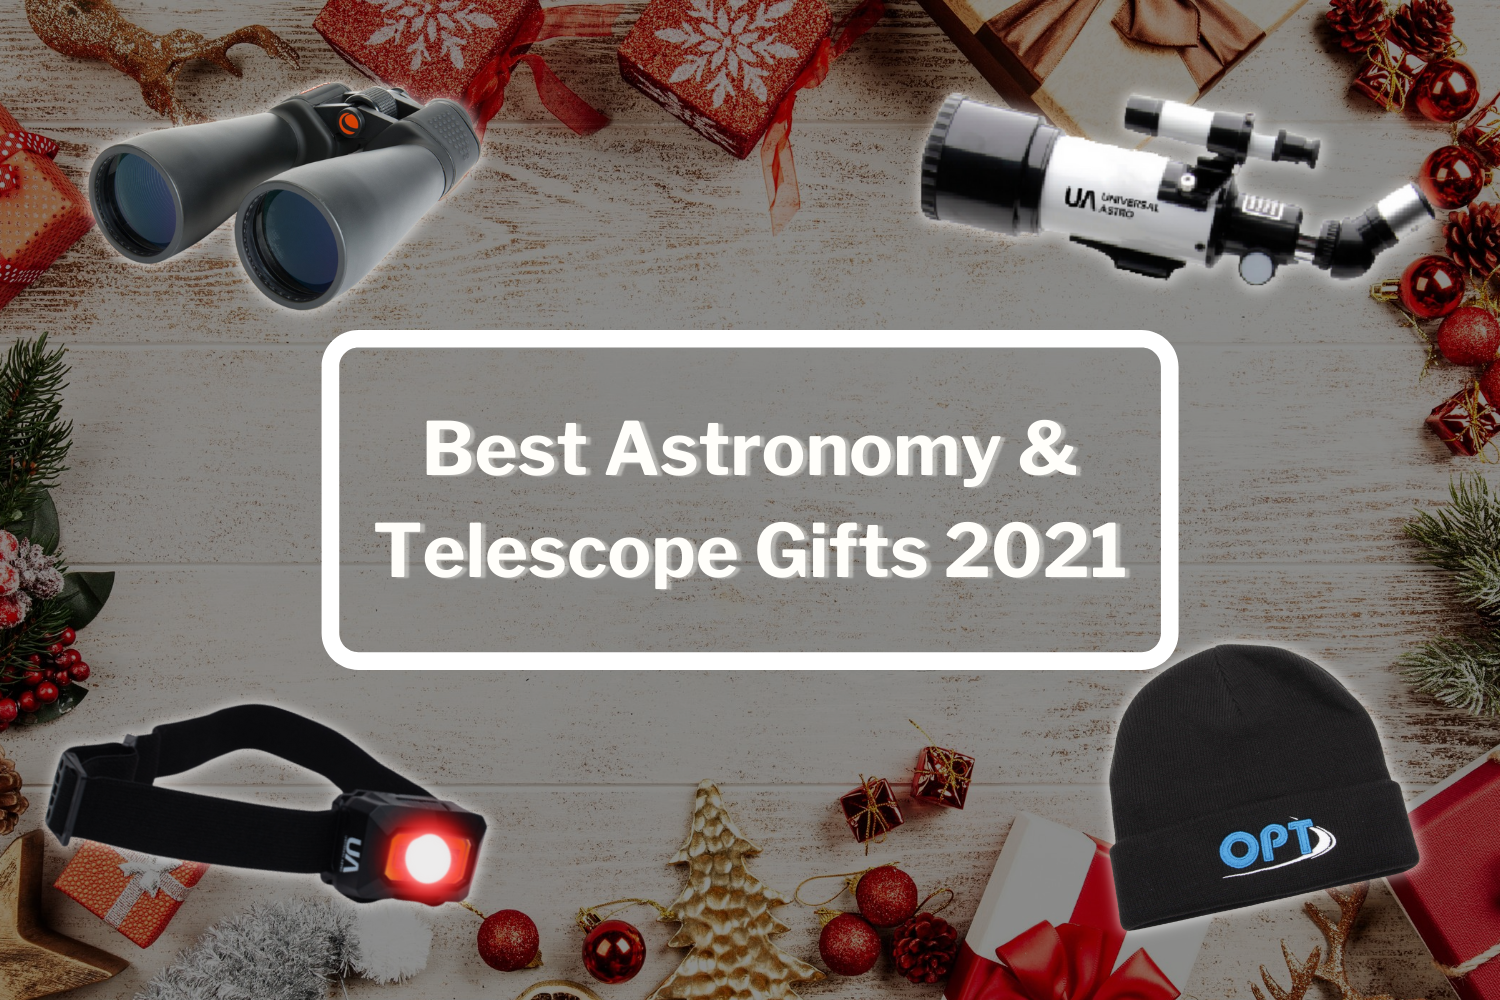 Best Astronomy & Telescope Gifts 2021